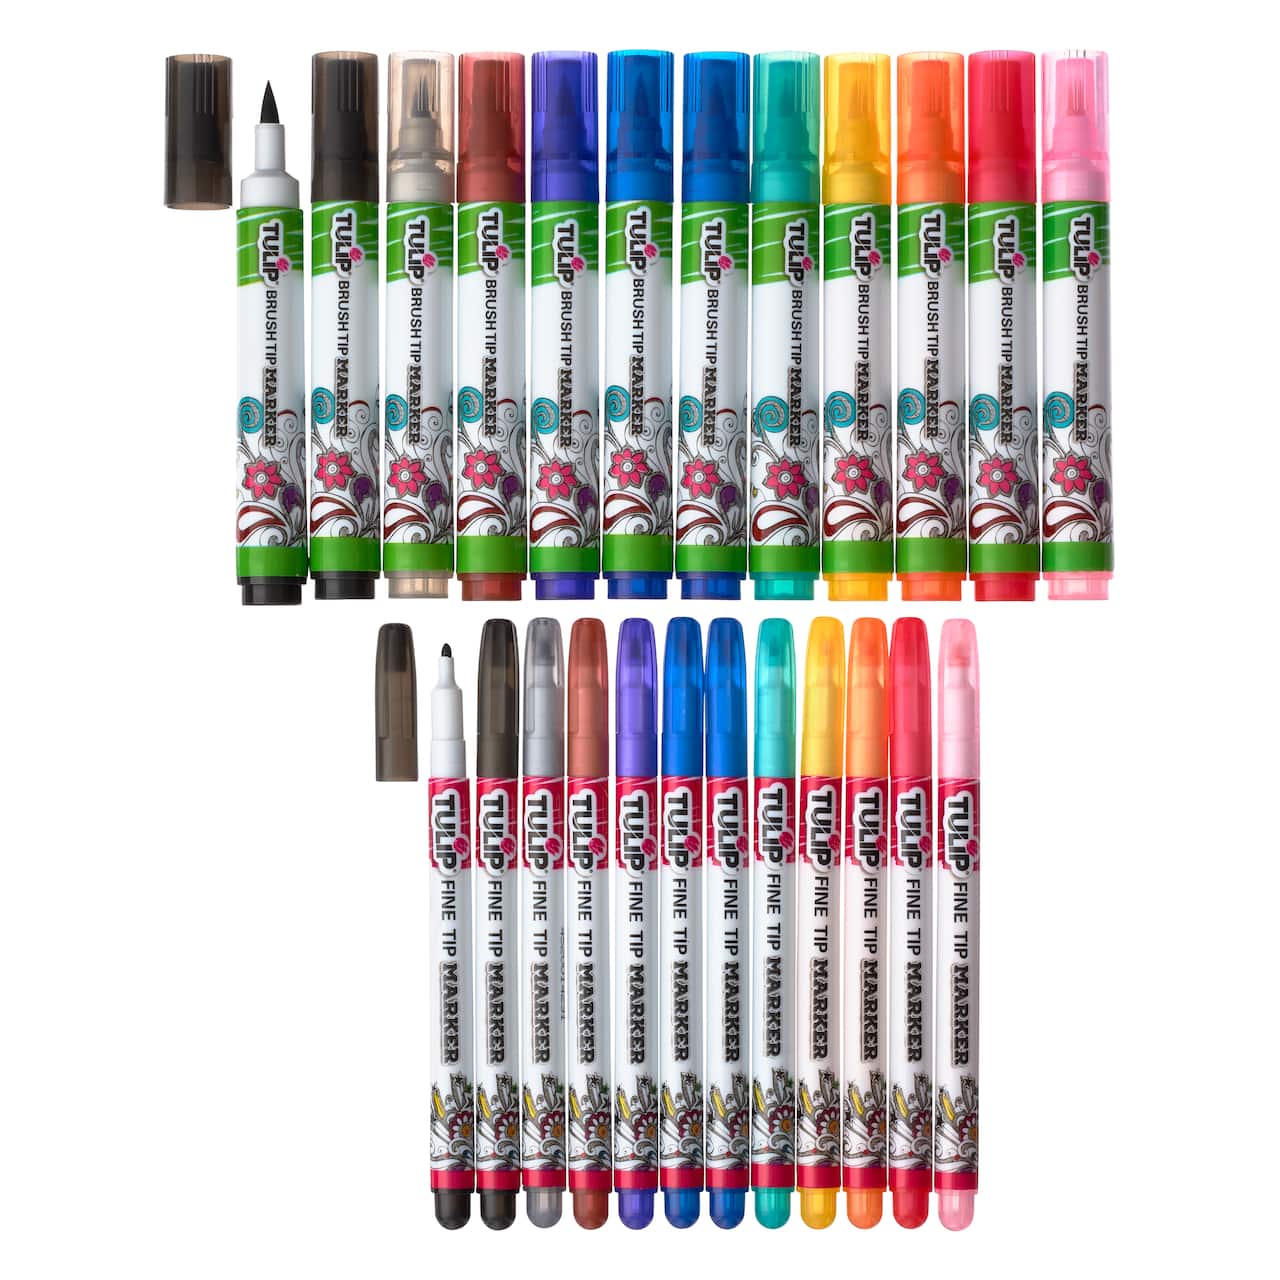 Tulip® Ultimate Fabric Markers Rainbow, 24 Pack